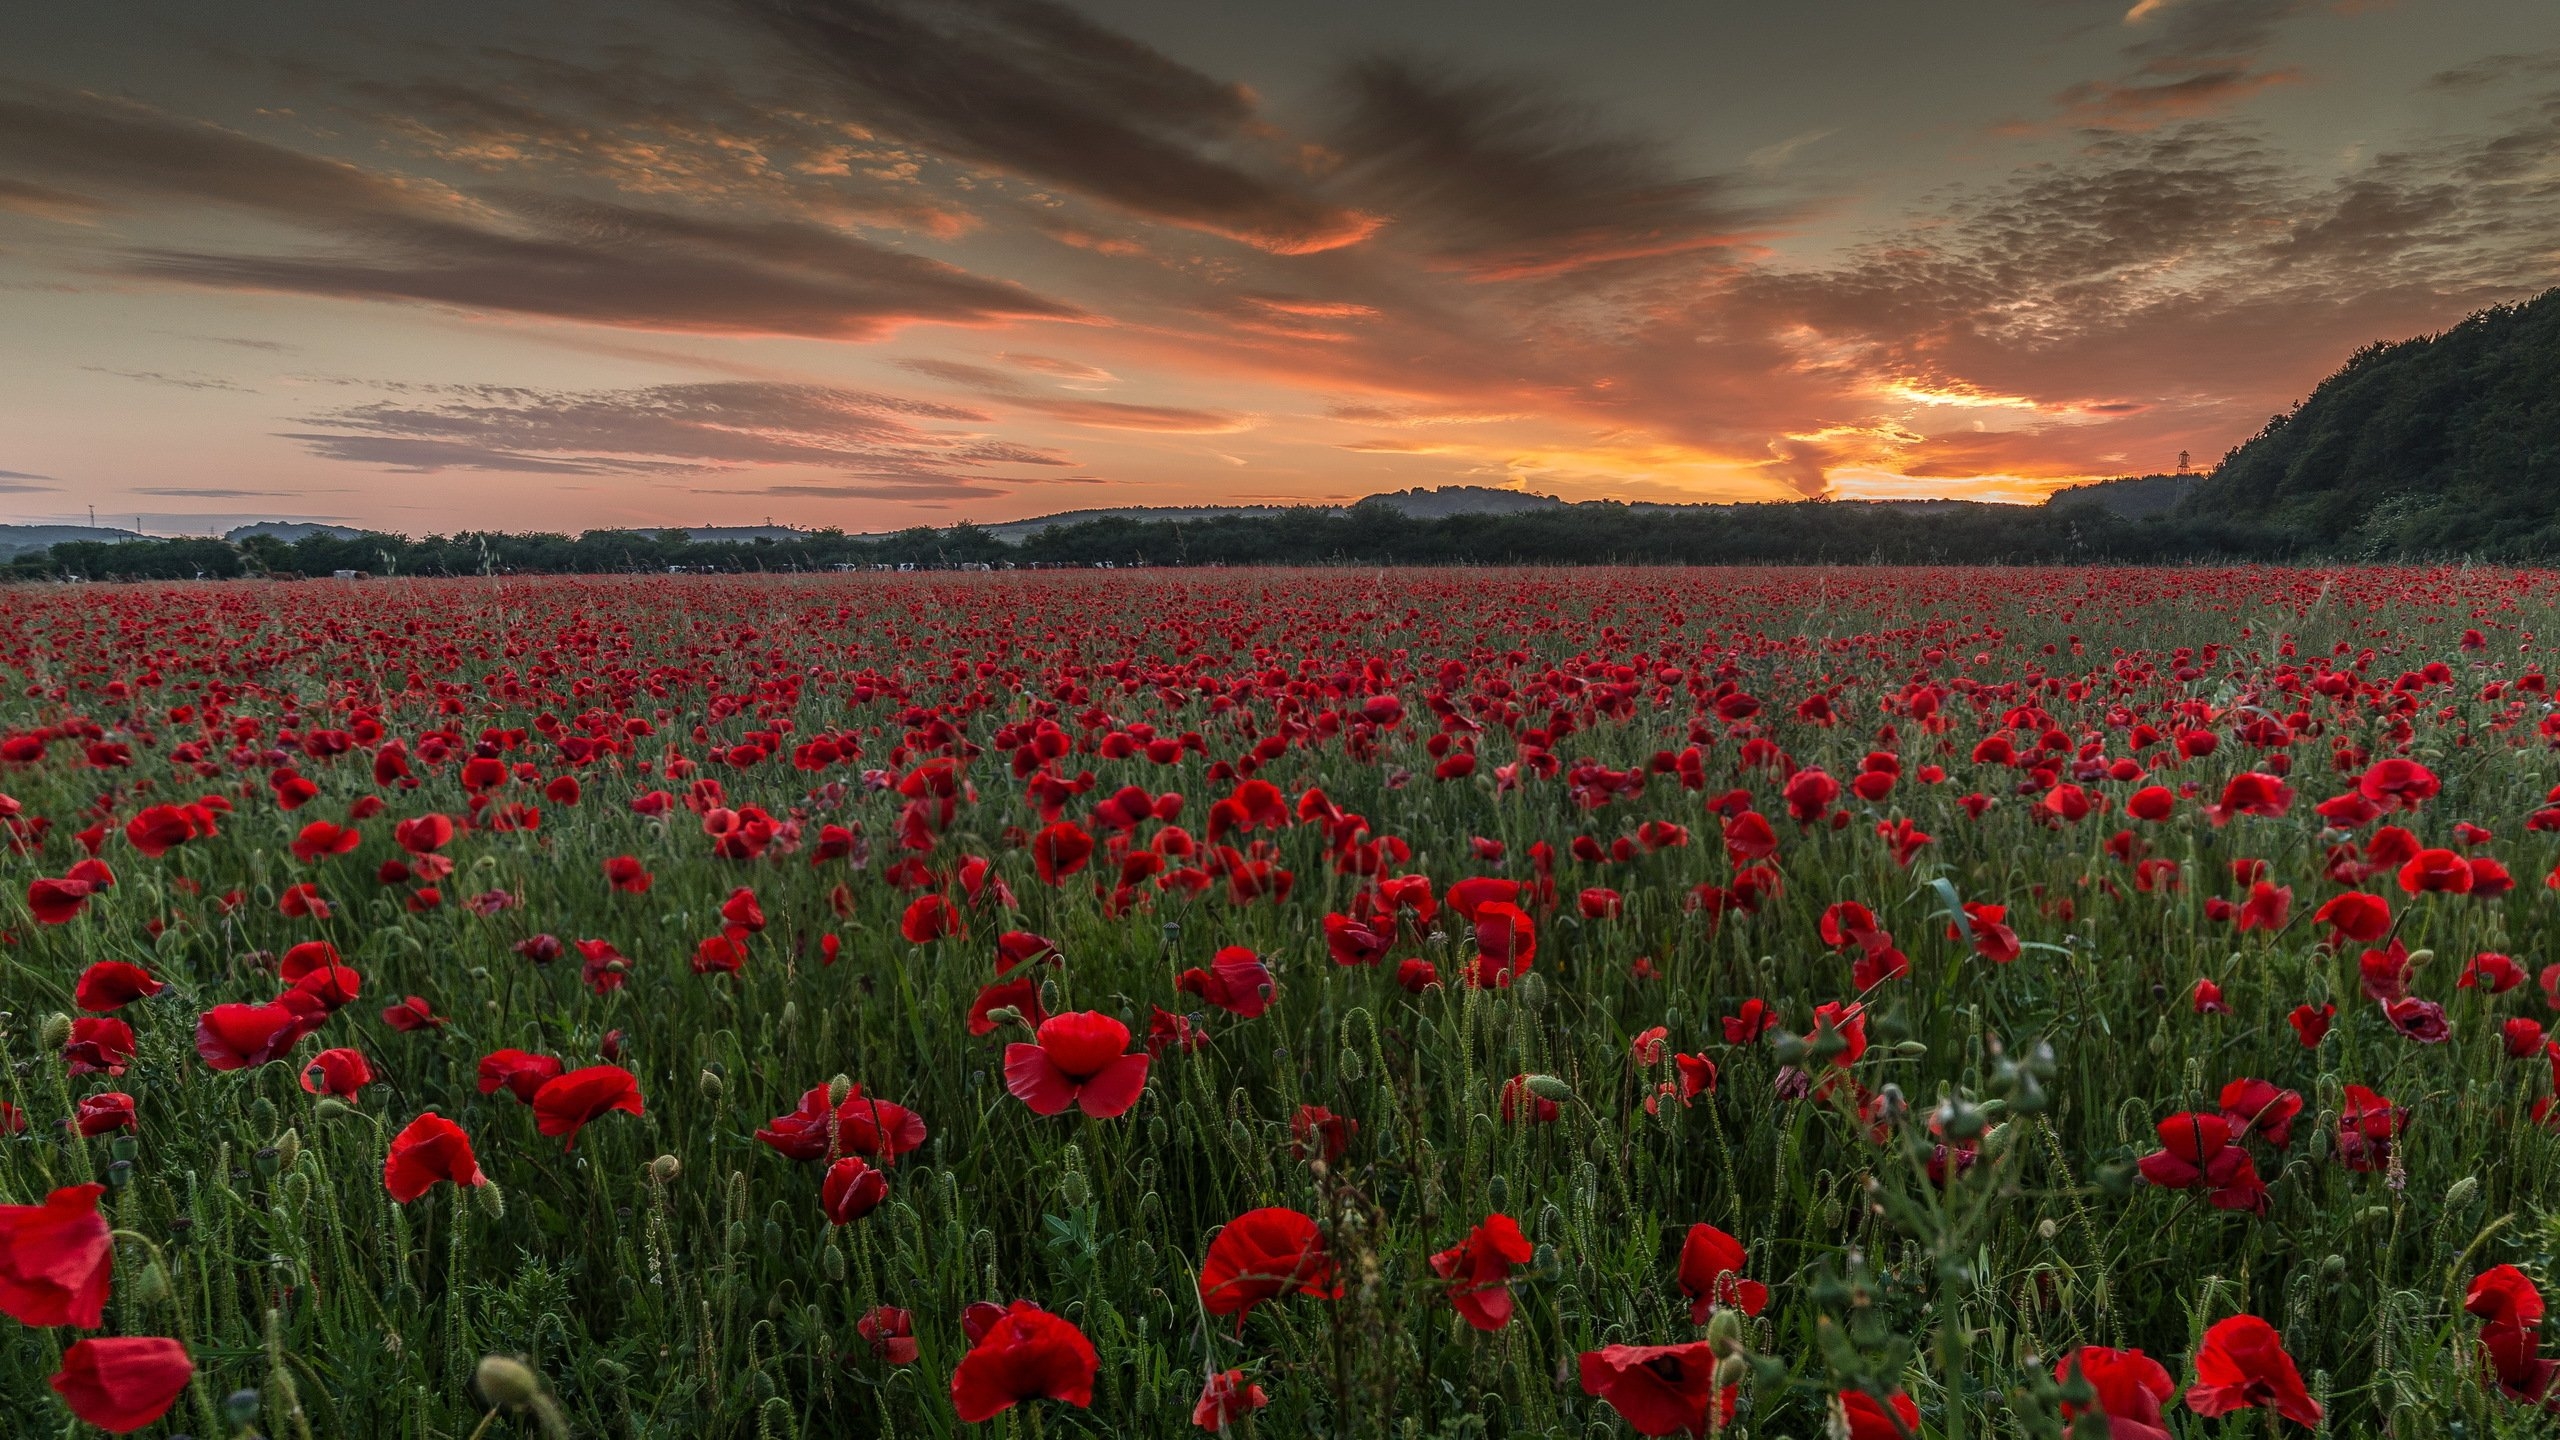 A large evening field of poppies